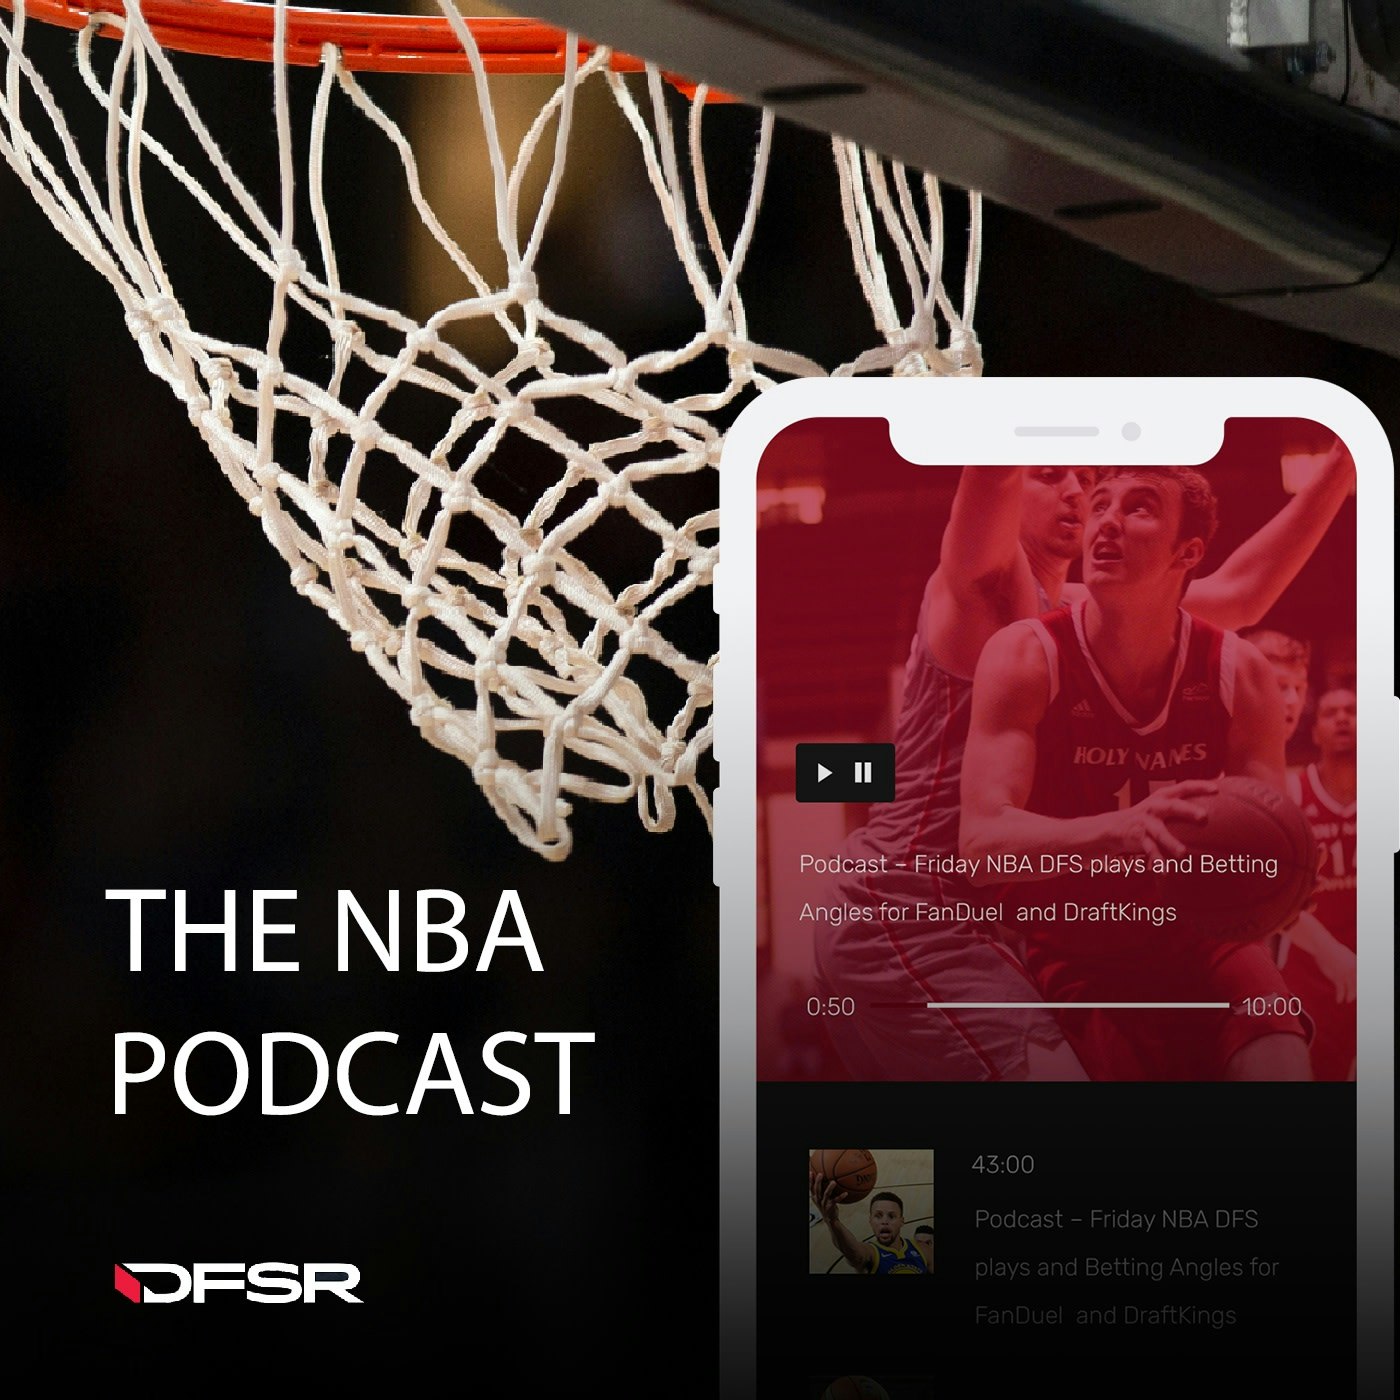 DFS NBA Podcast for FanDuel and DraftKings - Friday  11/23/18